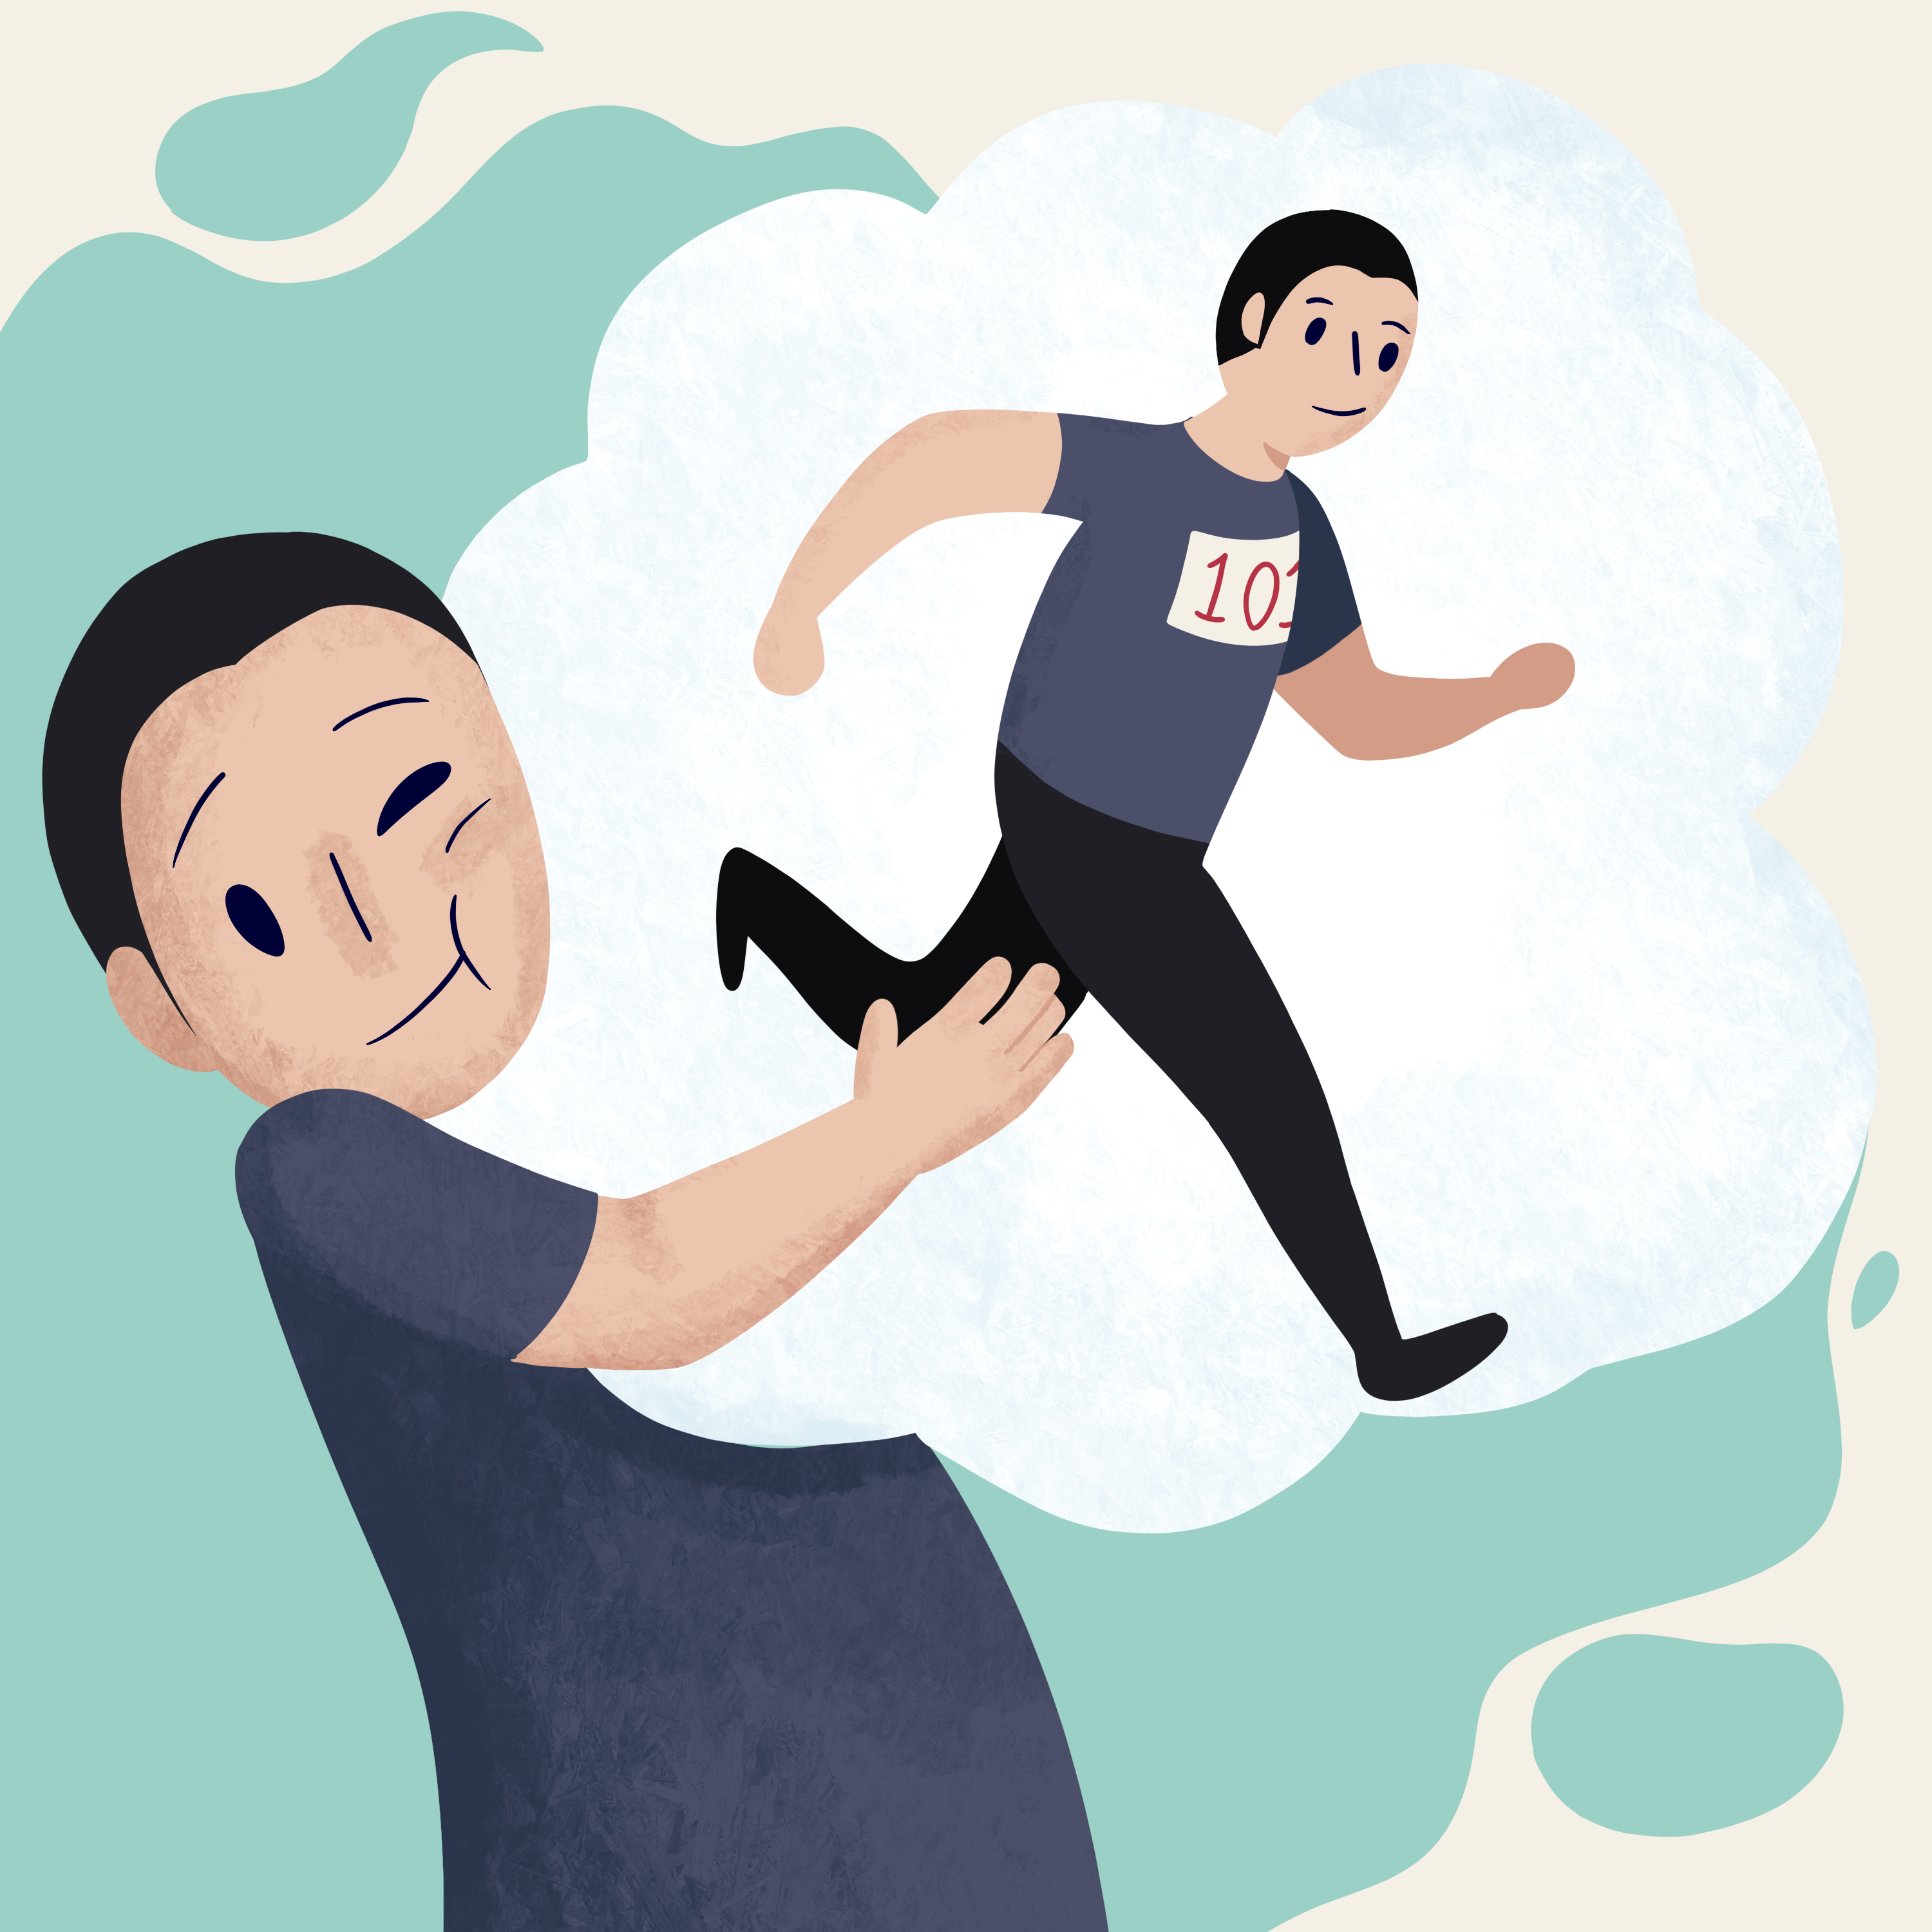 An illustration of a man experiencing the endowment effect. he is hugging his visualization of running the race, attaching his emotions to the visualization.